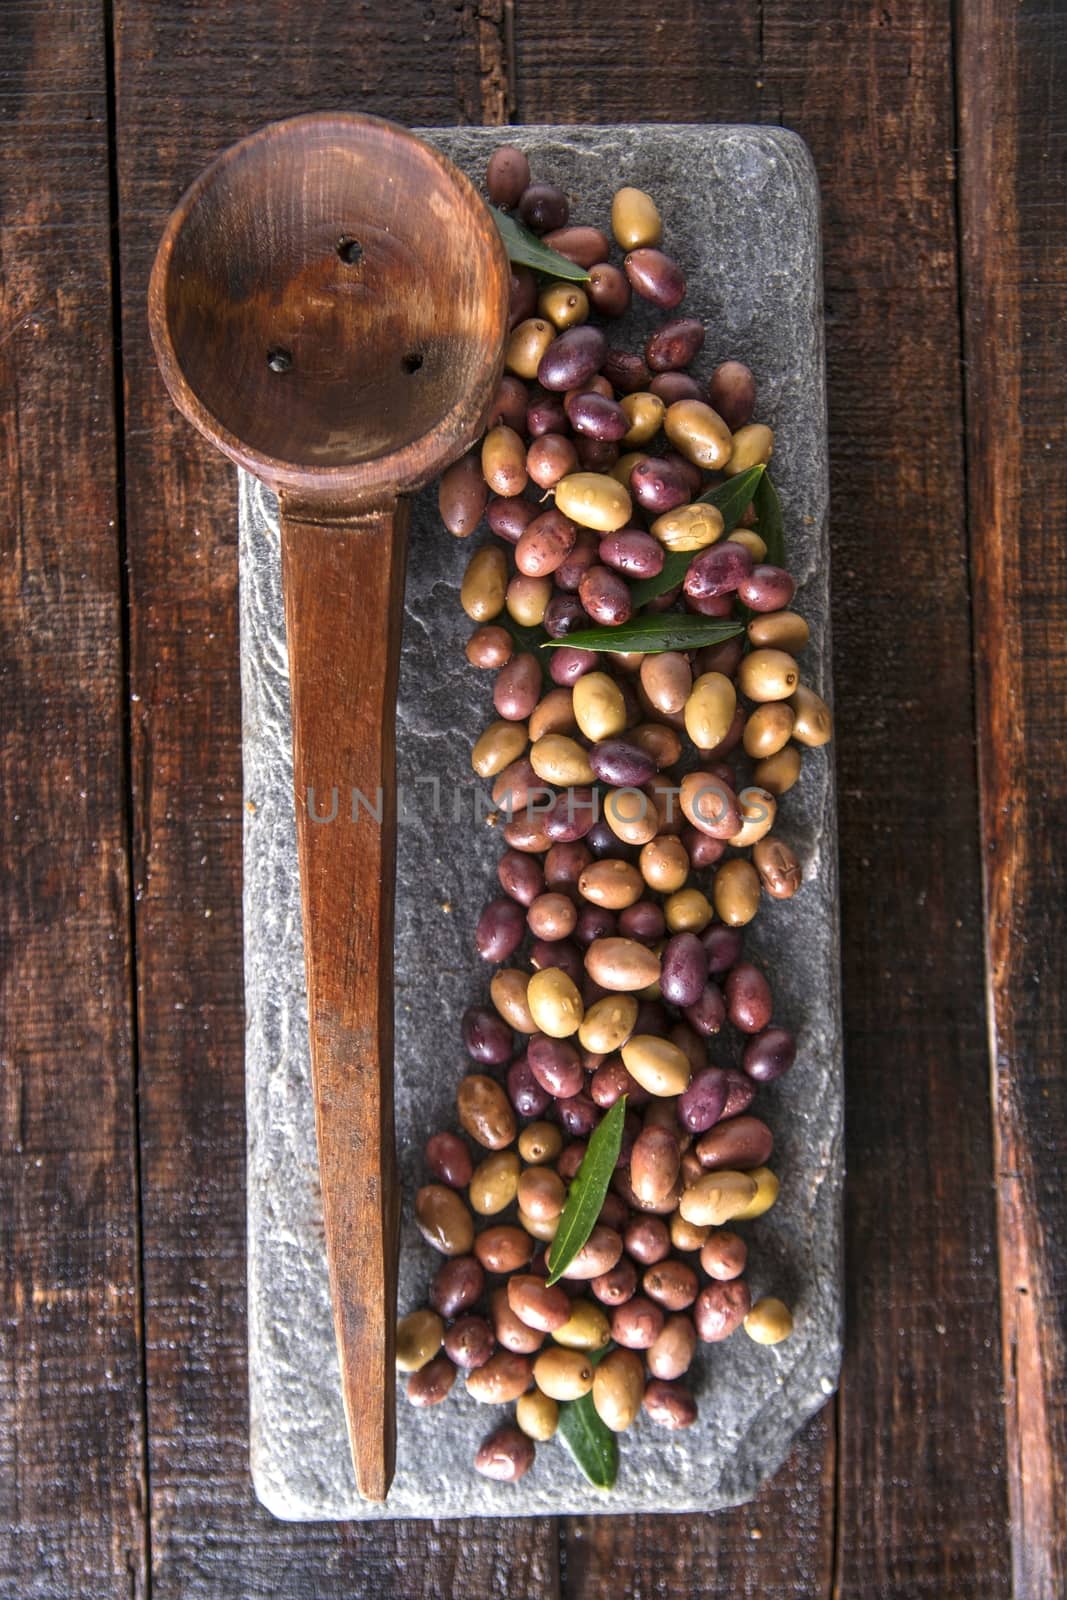 Mixed olives in brine by fotografiche.eu